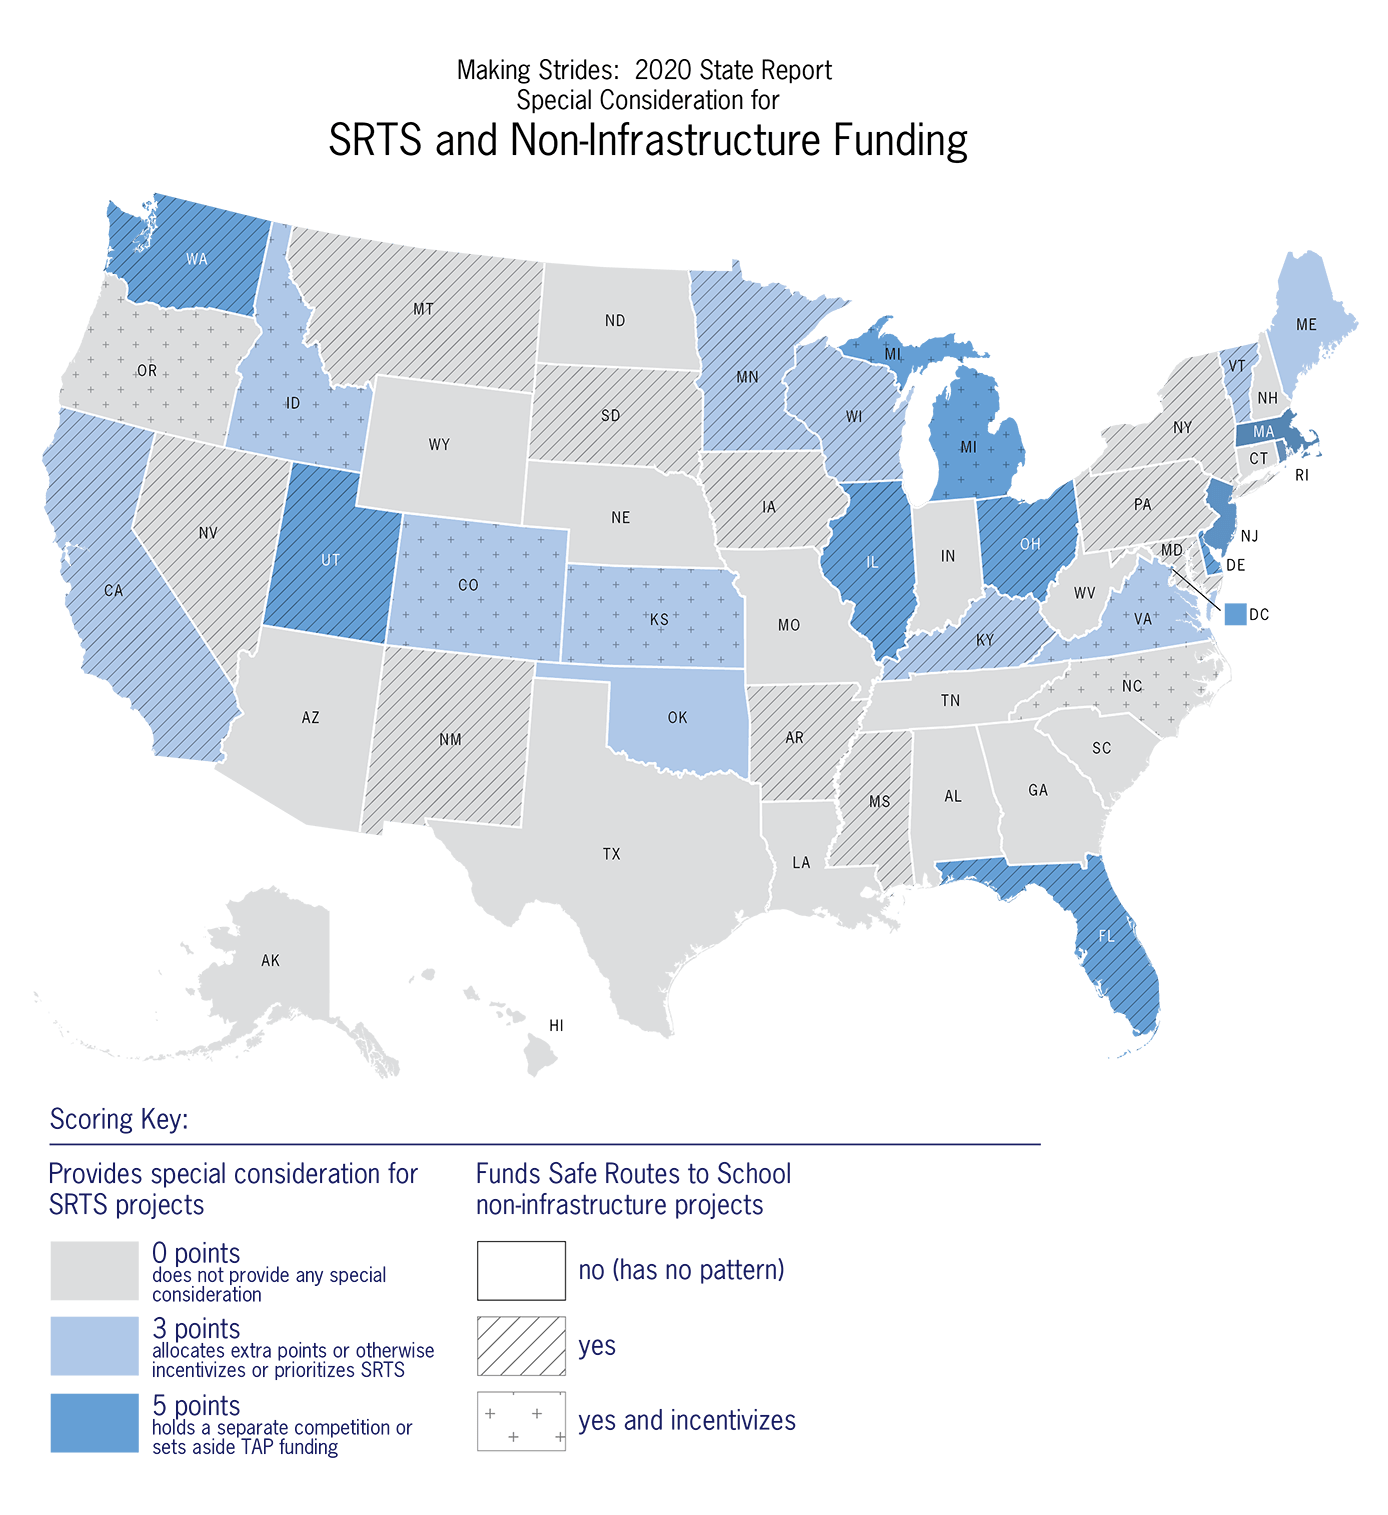 SRP_MAP_2020-State_scores-NonInfra